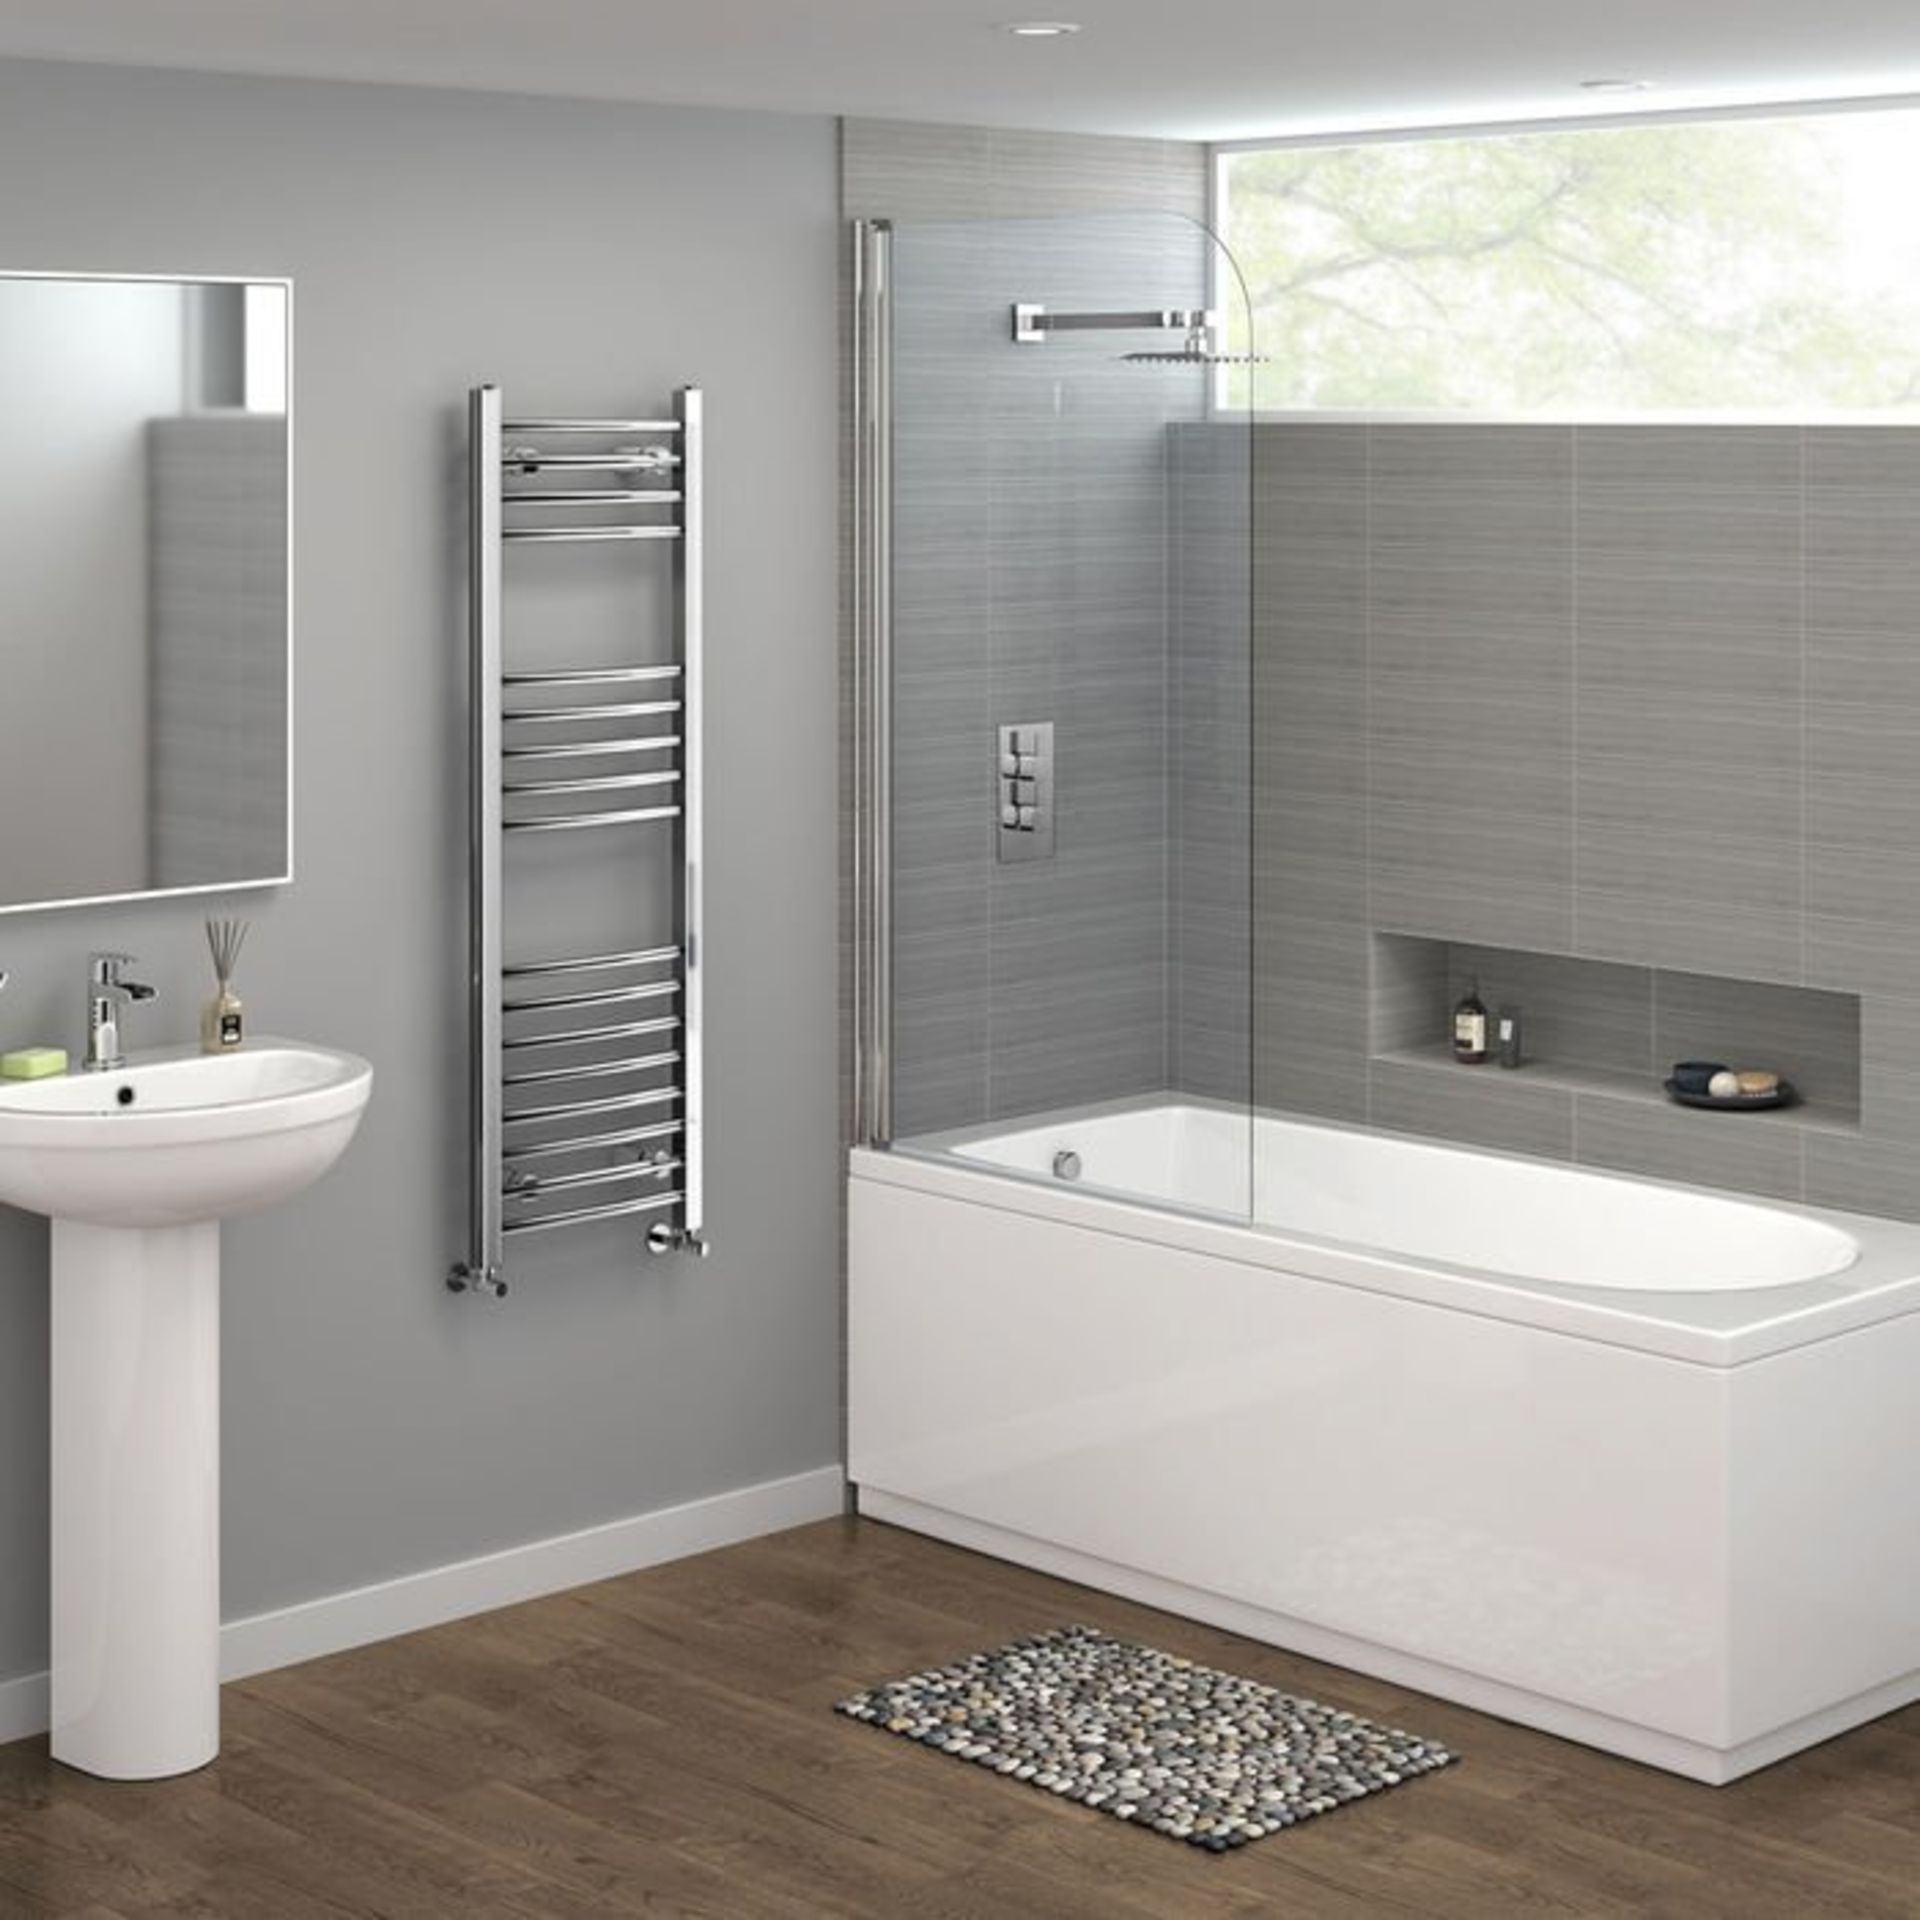 (S114) 1200x400mm - 20mm Tubes - Chrome Curved Rail Ladder Towel Radiator. Low carbon steel chrome - Image 2 of 3